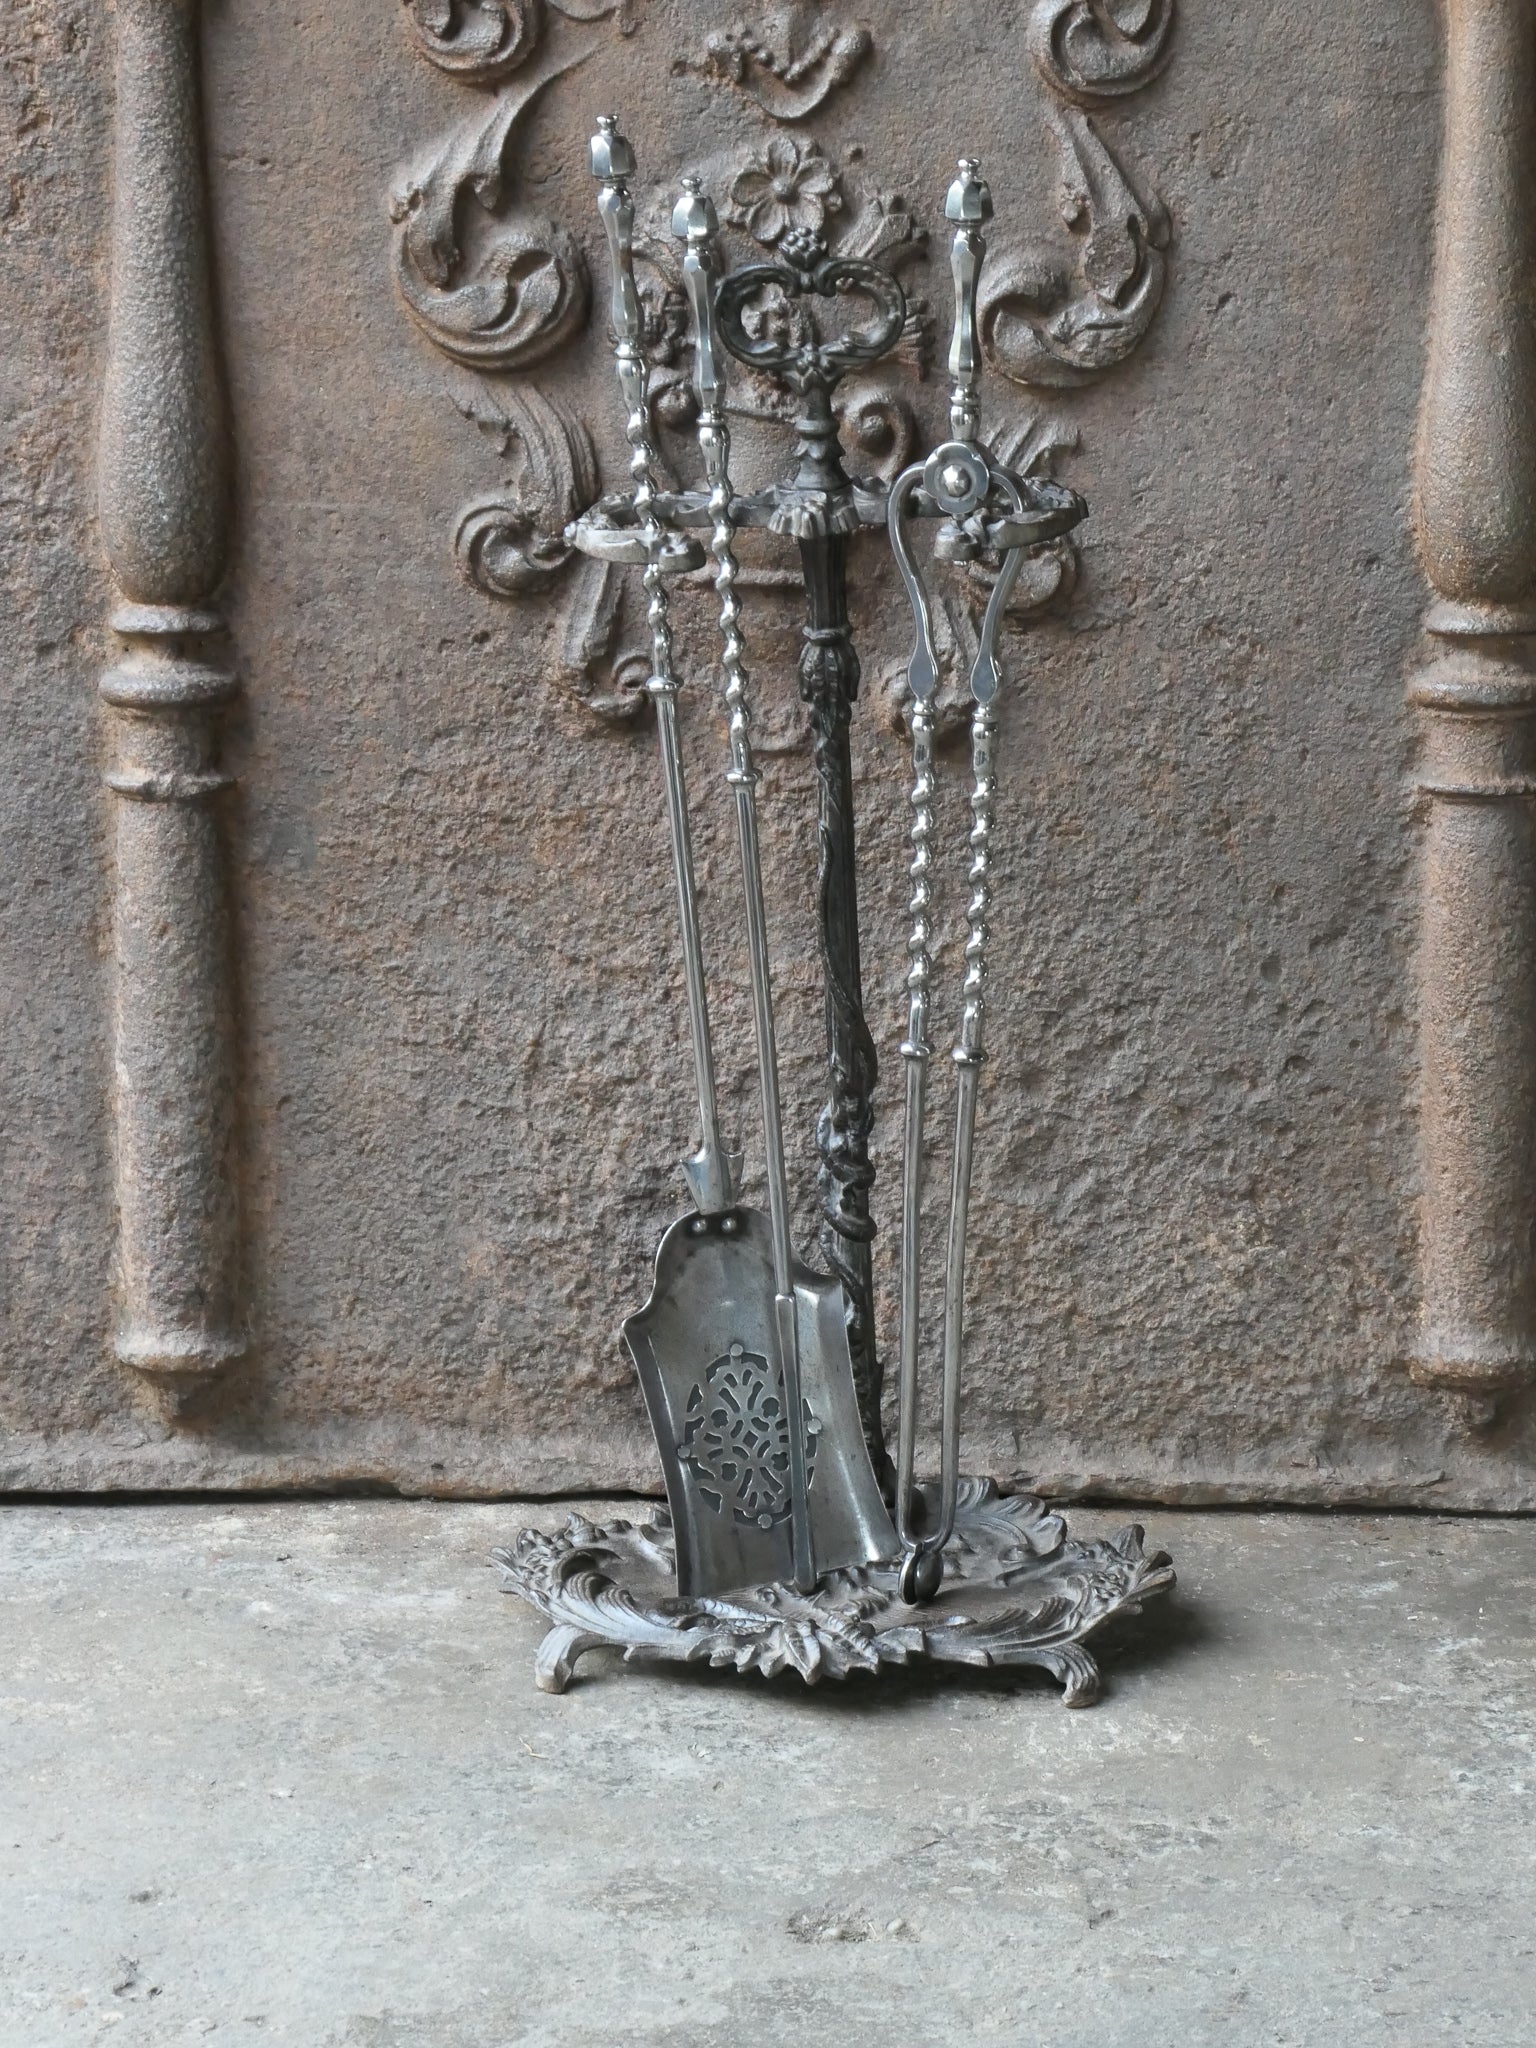 18th - 19th century English Georgian fireplace tool set. The tool set consists of tongs, shovel, poker and stand. The stand is made of cast iron and the tools are made of polished steel. The set is in a good condition and fit for use in the